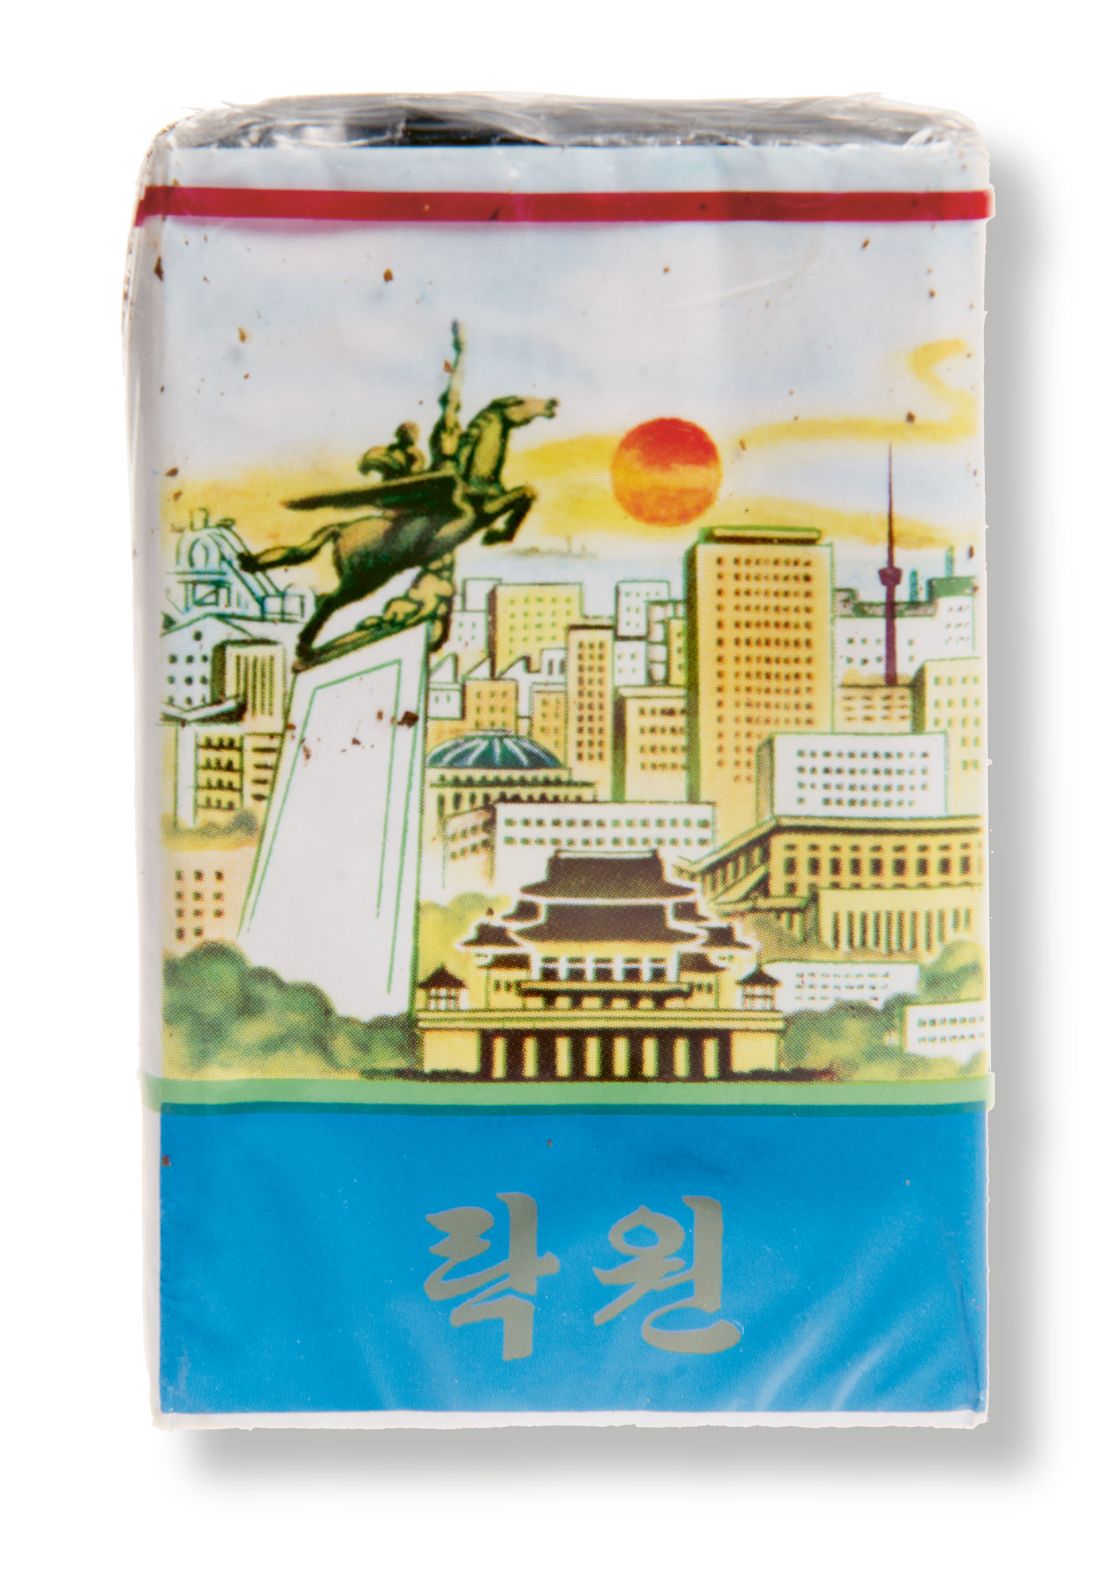 A packet of cigarettes by the Rakwon brand. It features images of Pyongyang structures including a statue of the Chollima: a mythical winged horse. 